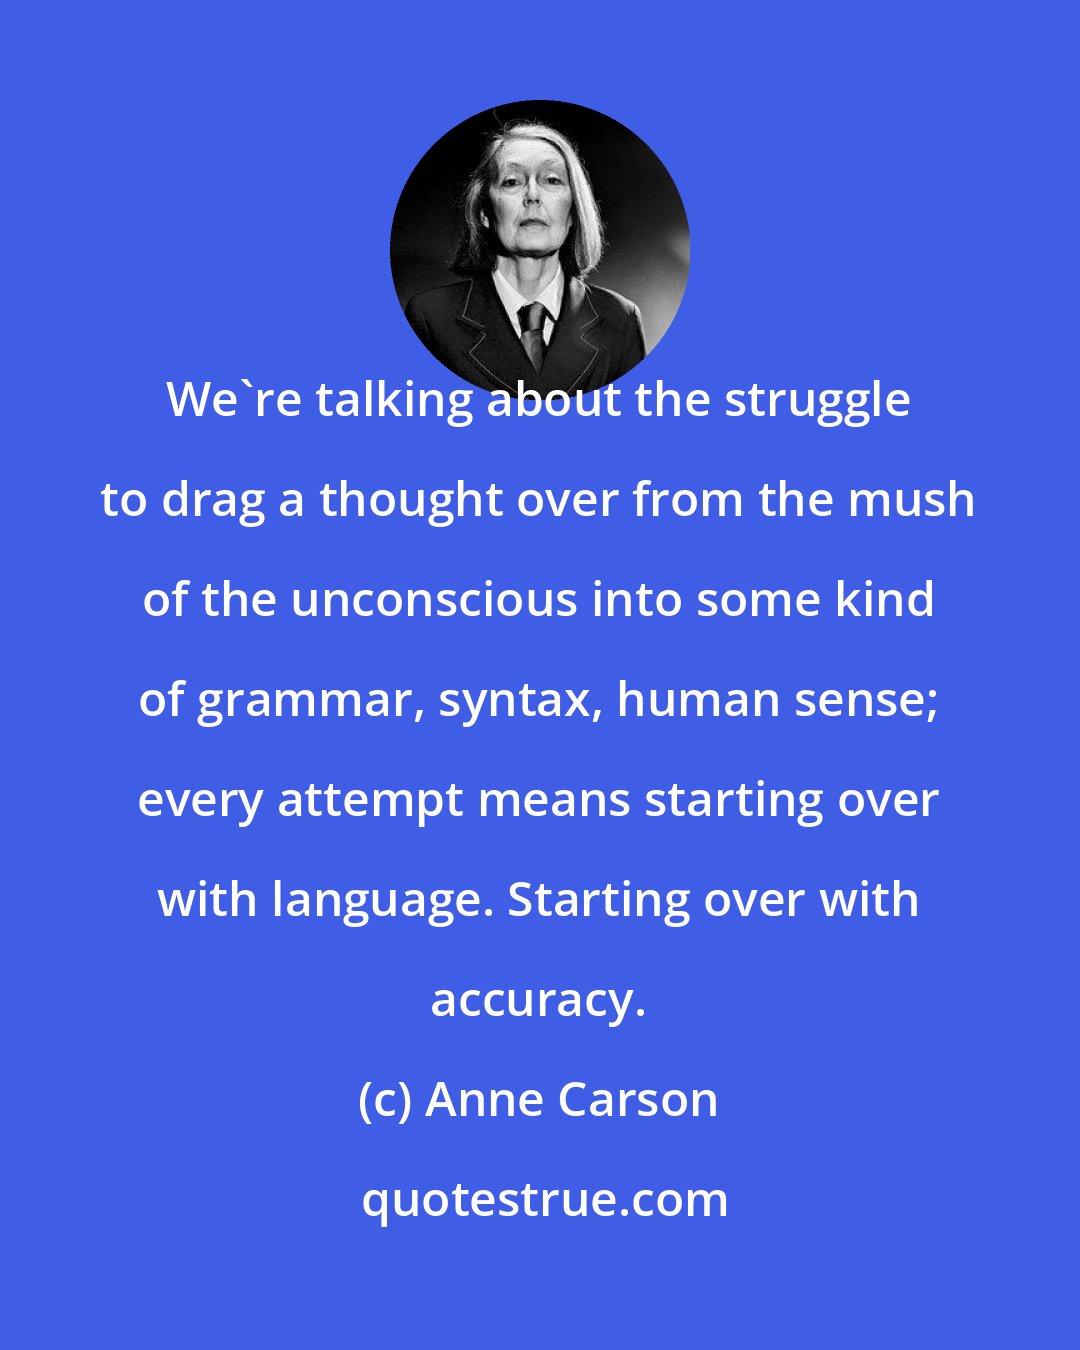 Anne Carson: We're talking about the struggle to drag a thought over from the mush of the unconscious into some kind of grammar, syntax, human sense; every attempt means starting over with language. Starting over with accuracy.